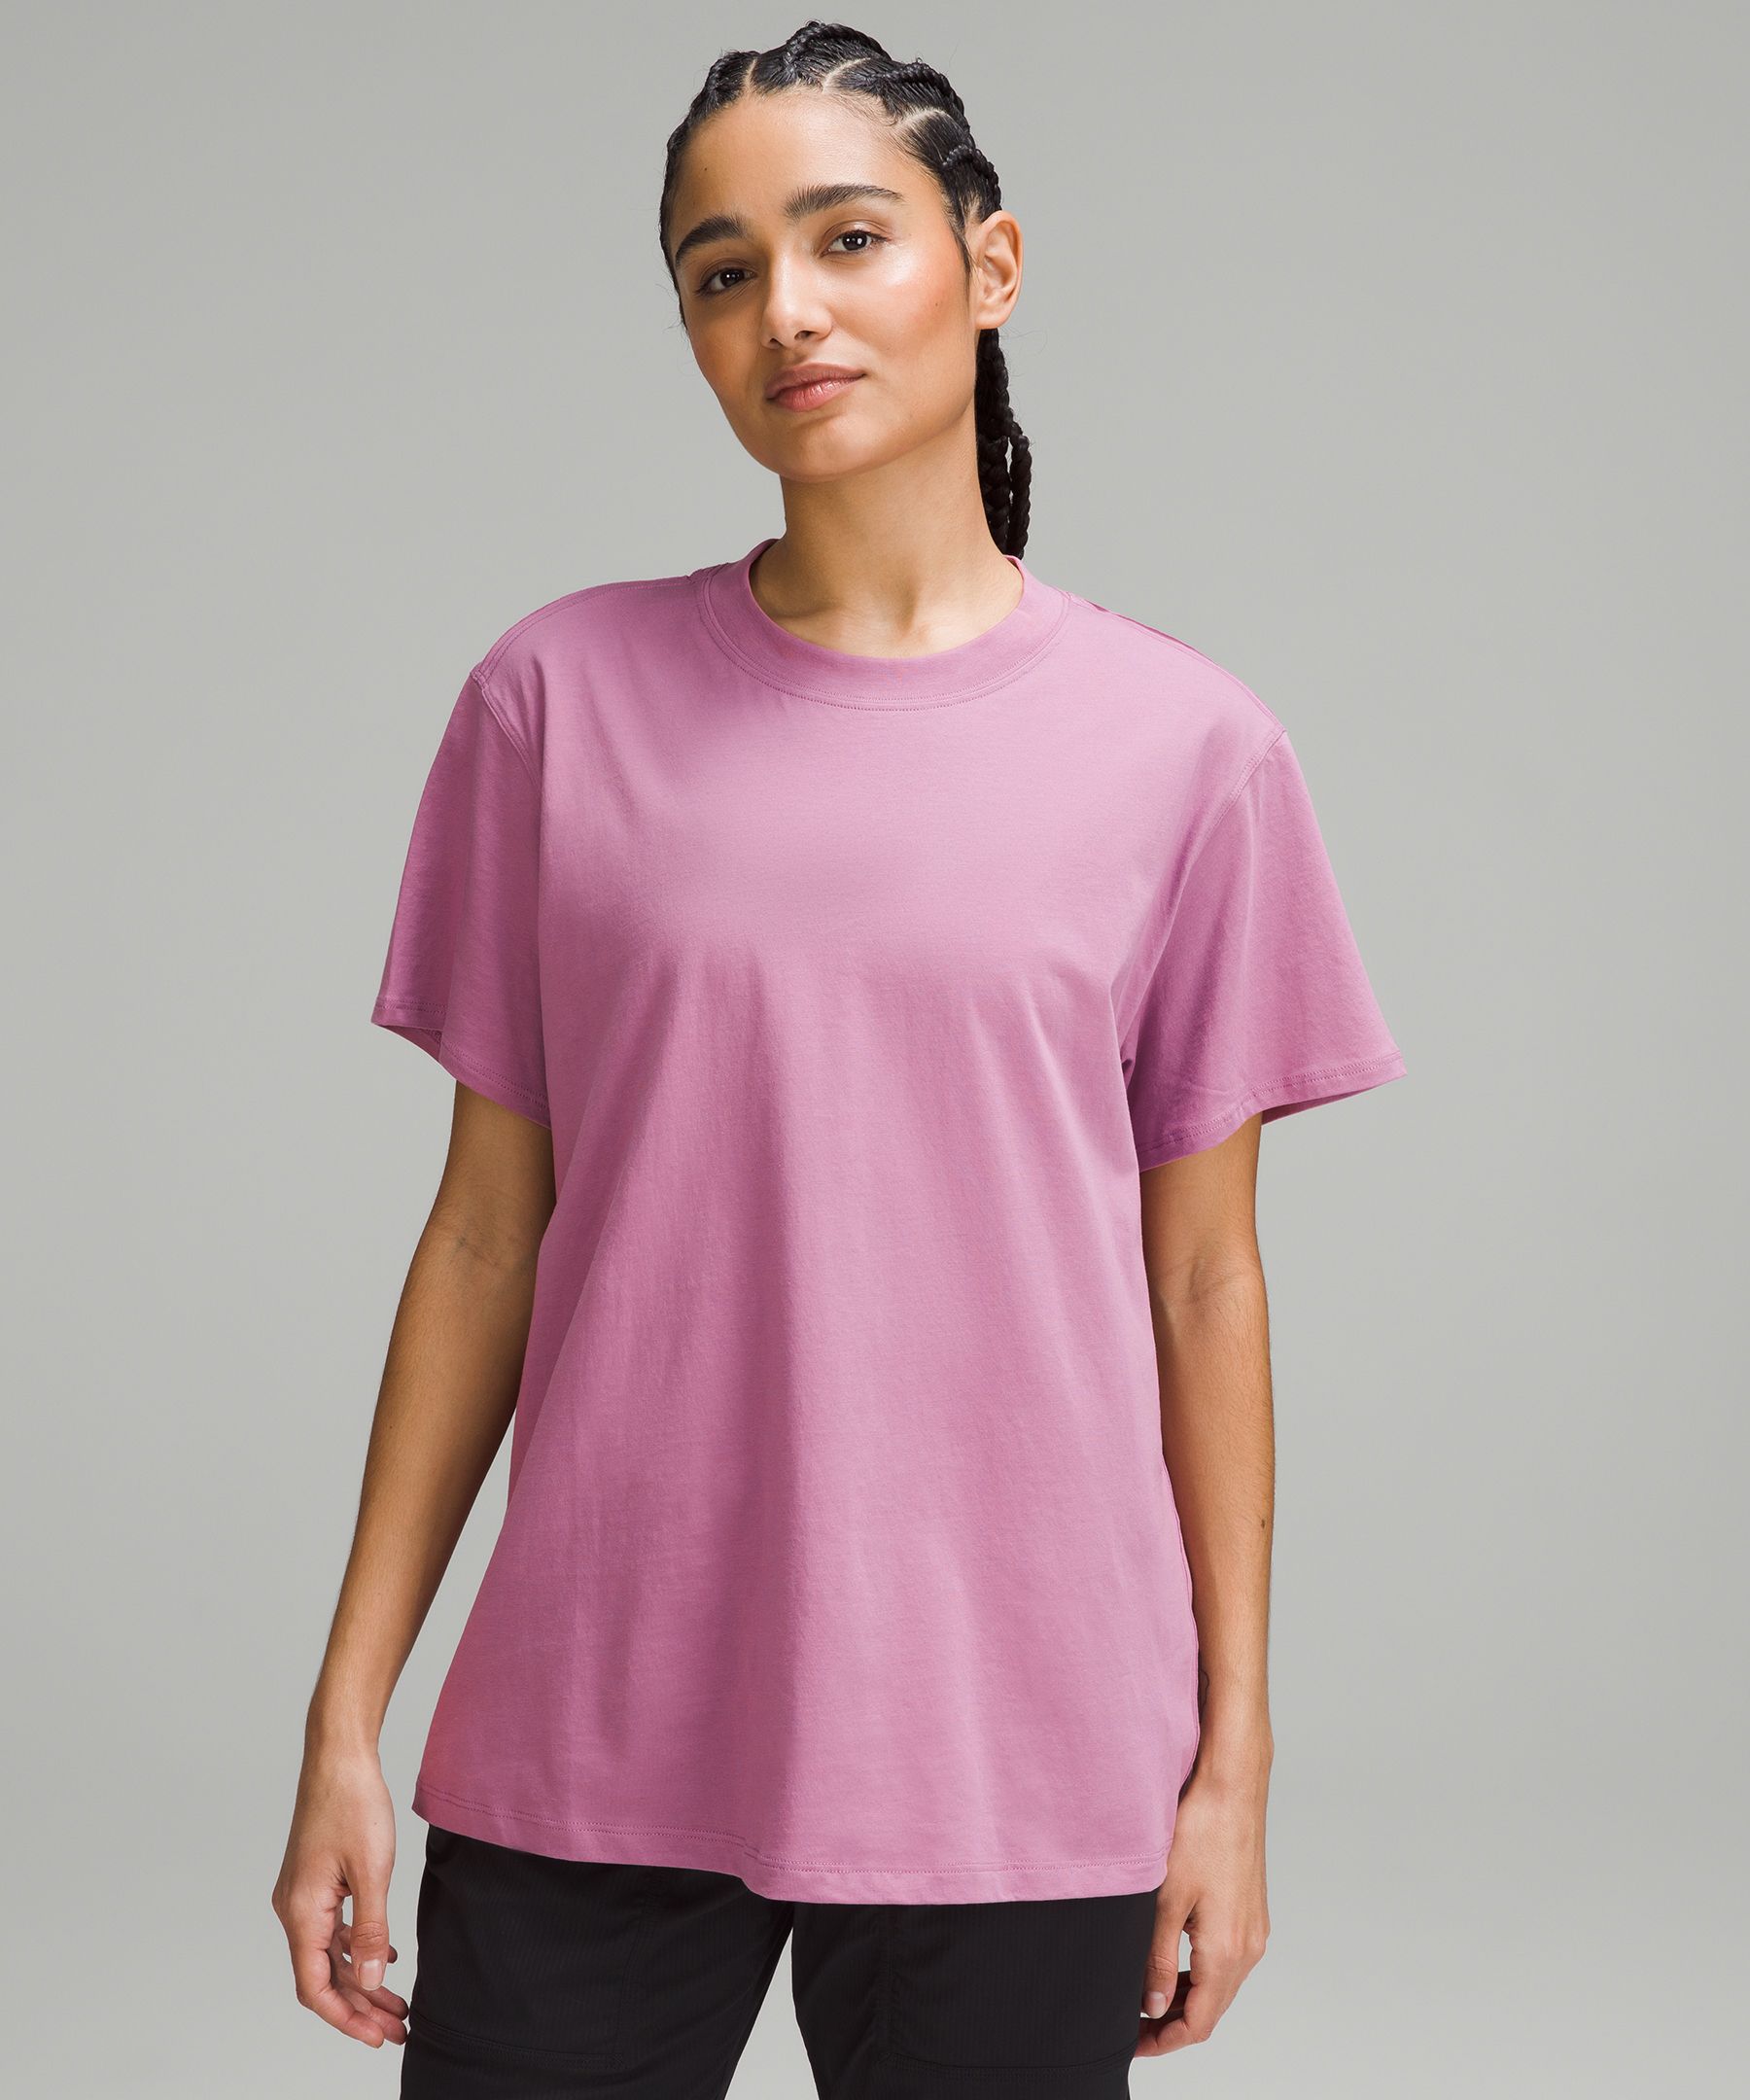 Lululemon All Yours Cotton T-Shirt. 2